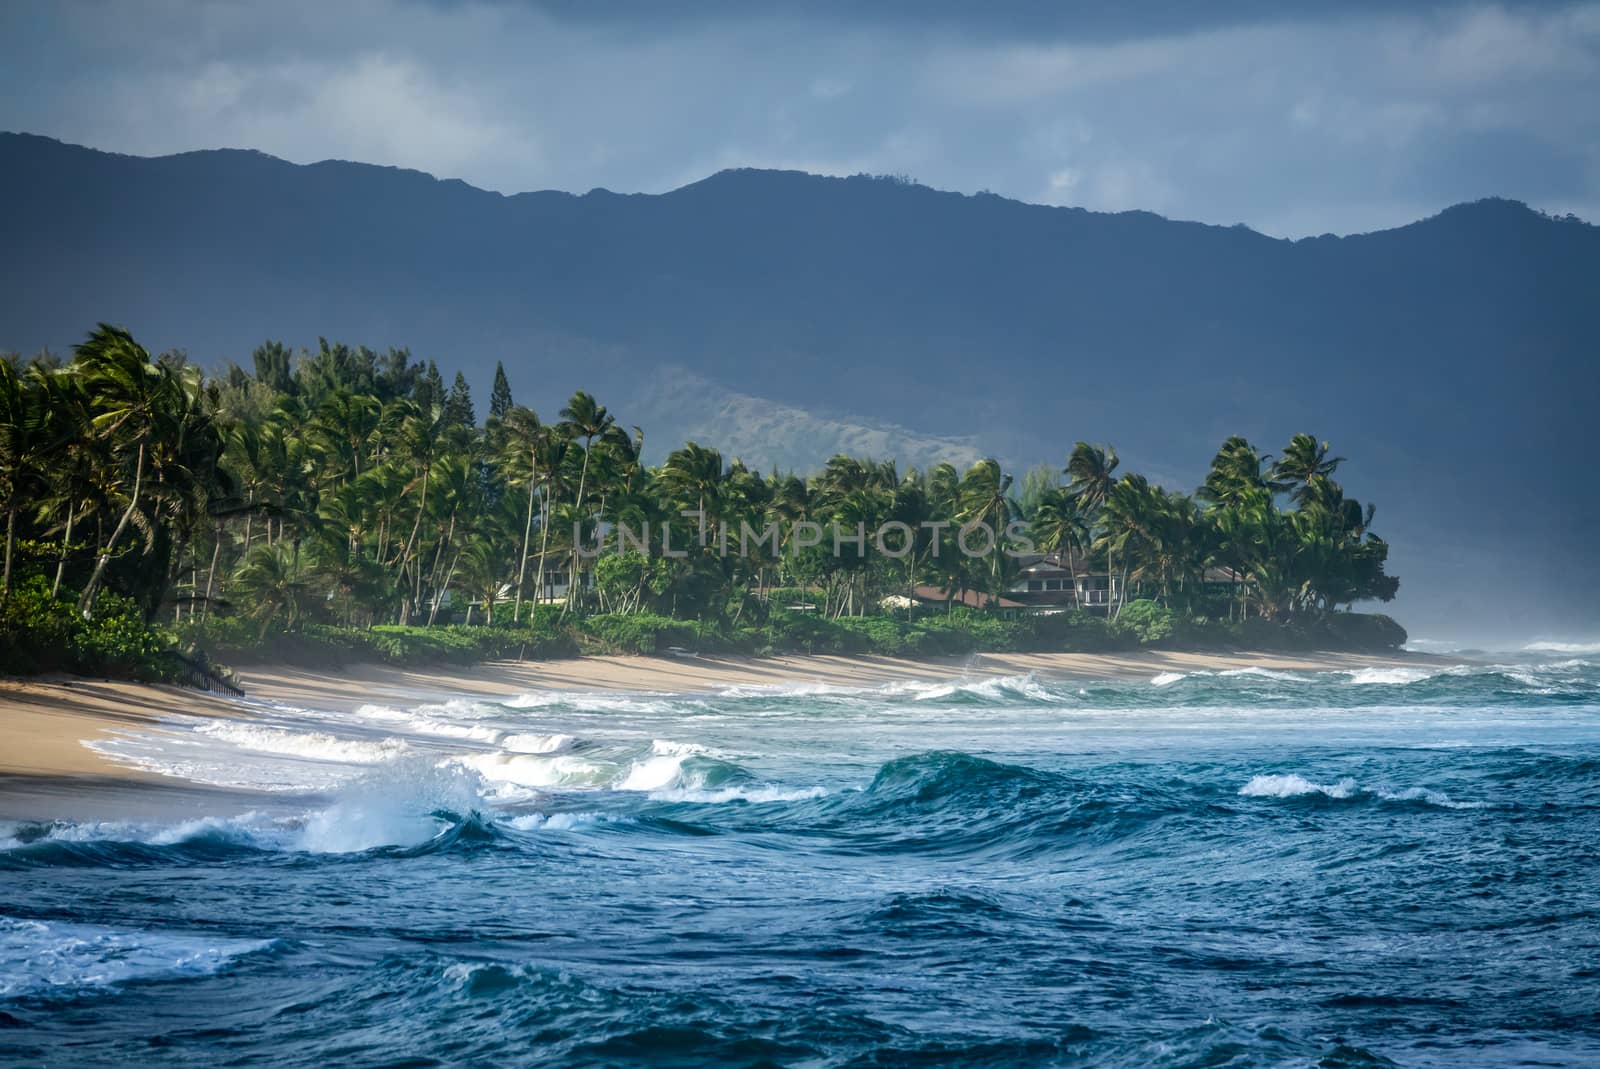 Luxury Beachfront Houses On Hawaii's North Shore On A Stormy Day